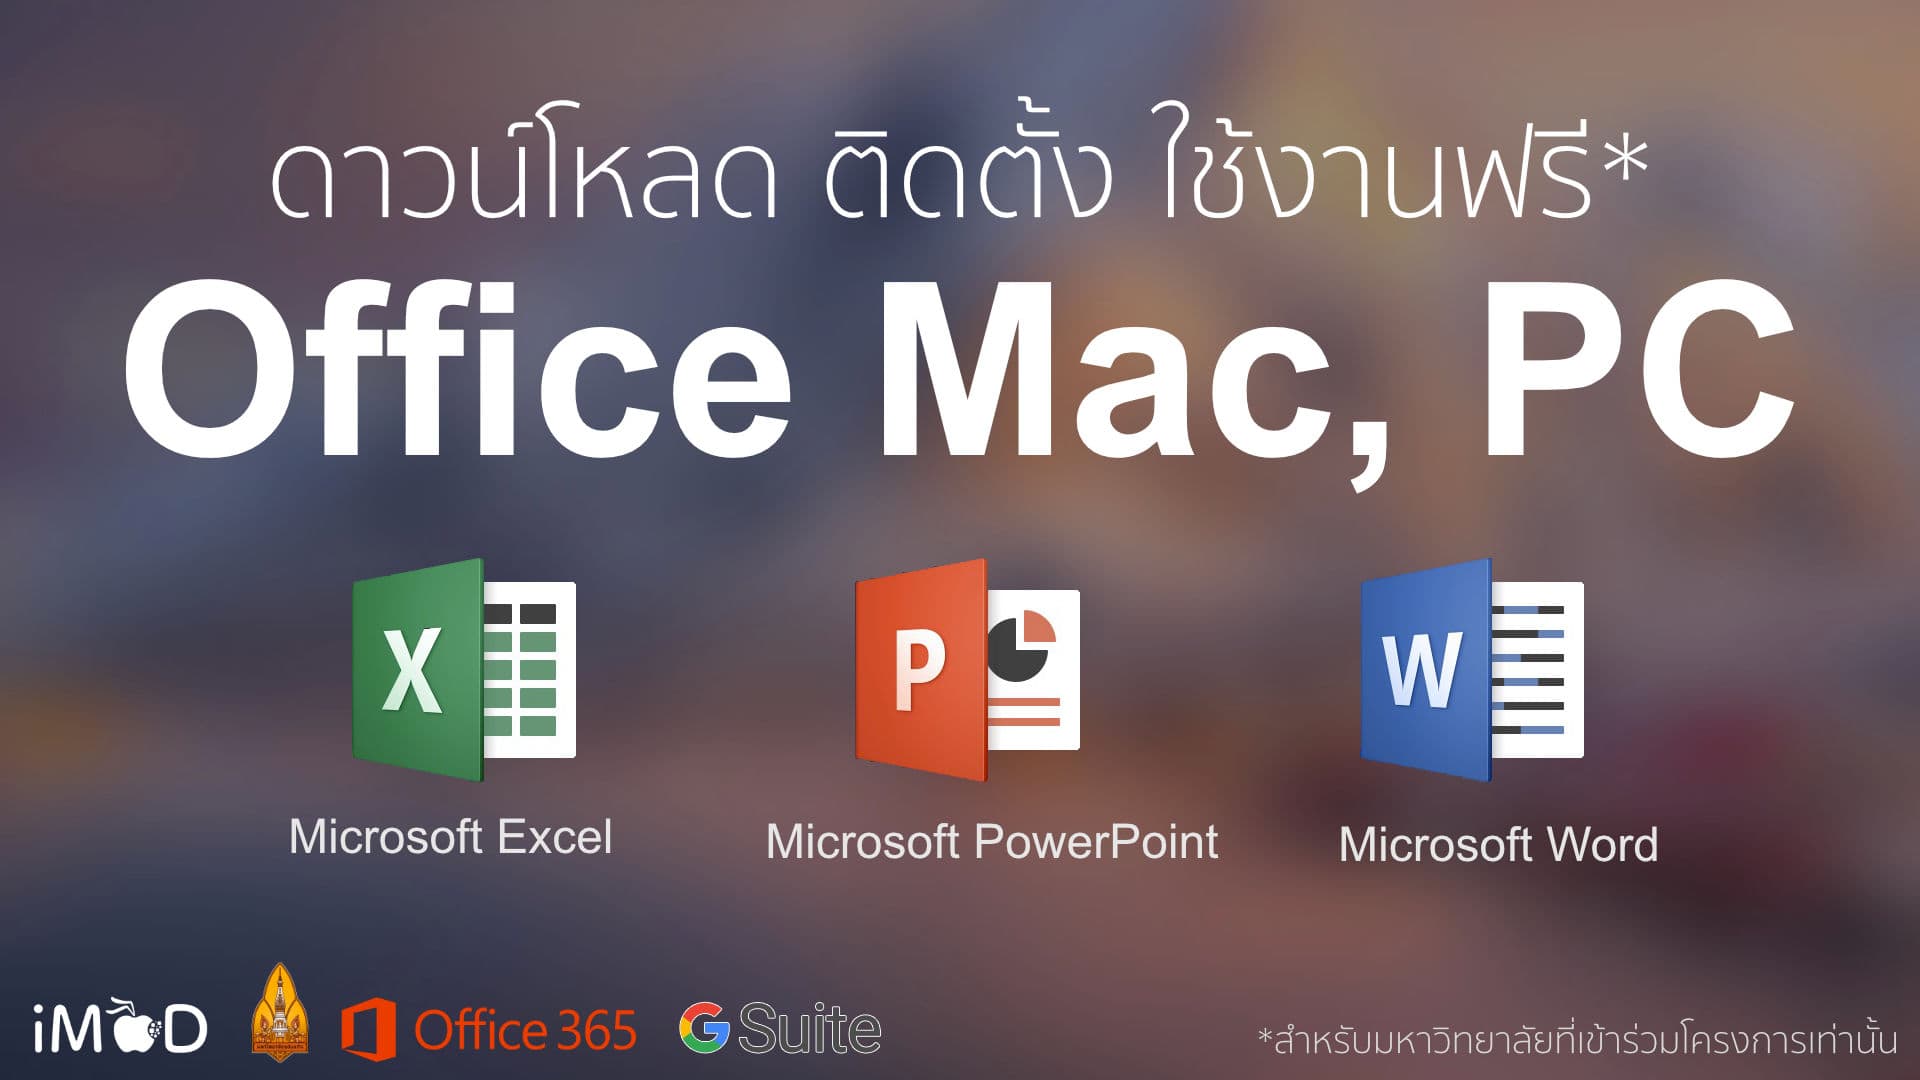 will microsoft office for mac work on a pc